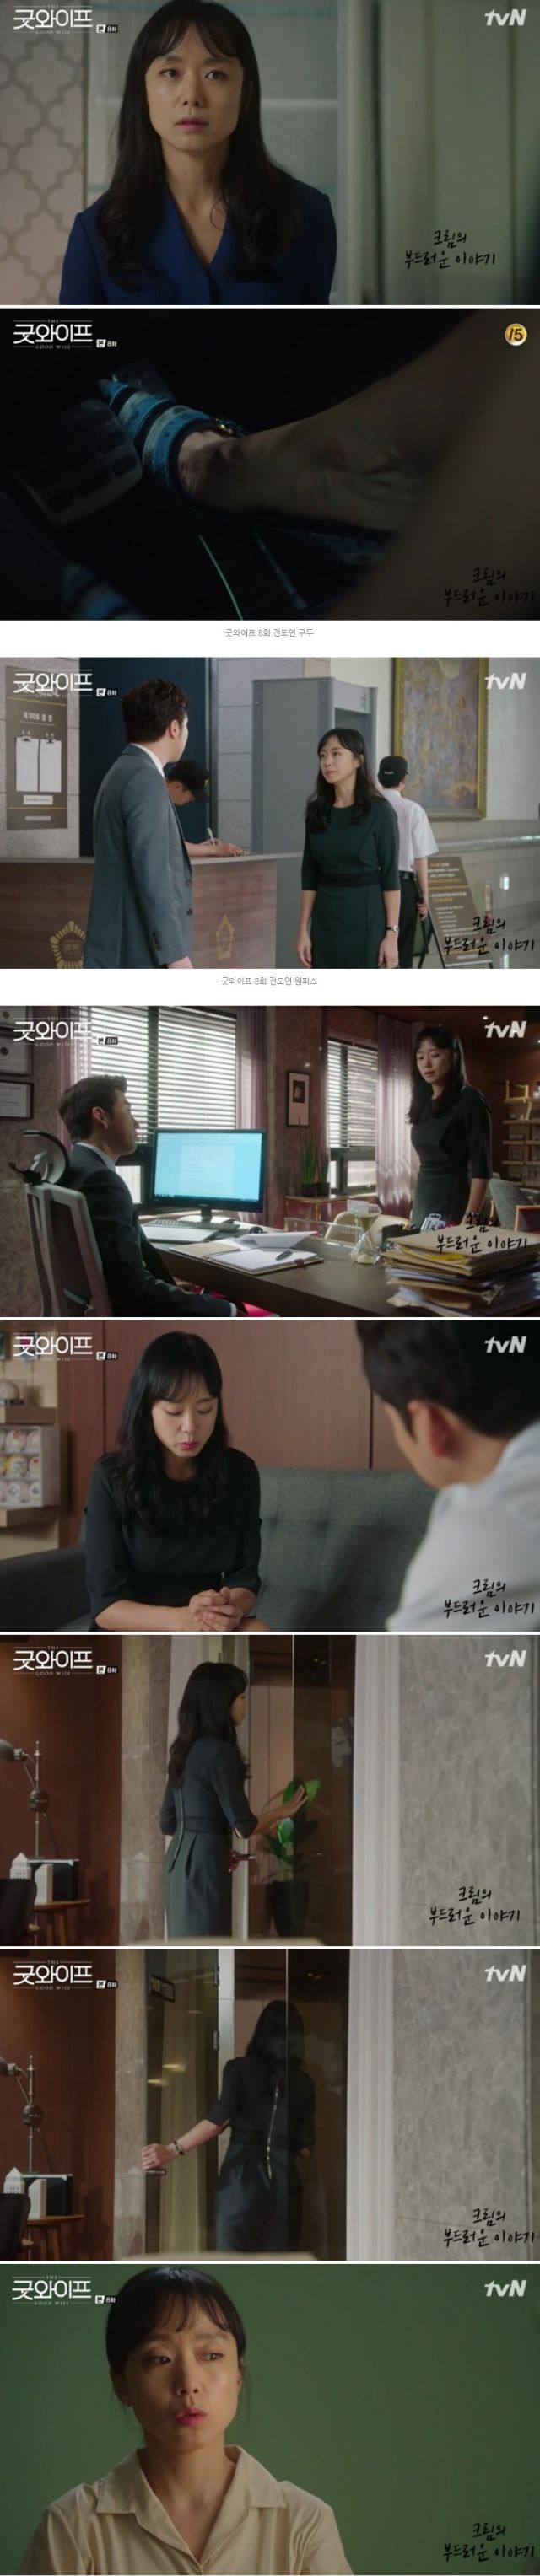 episodes 7 and 8 captures for the Korean drama 'The Good Wife'